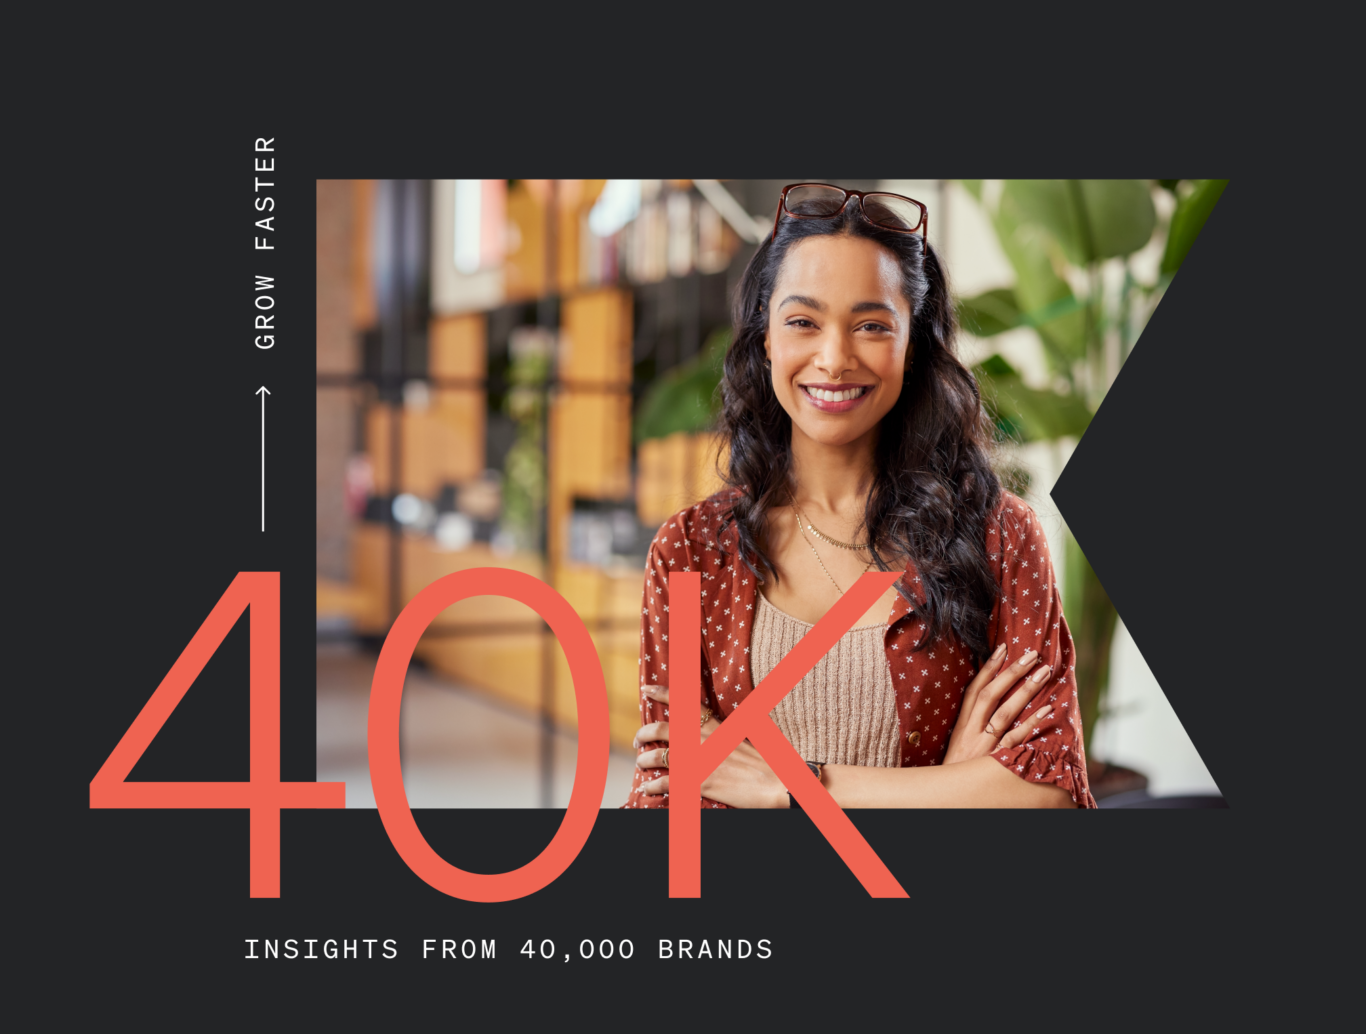 This image features a woman smiling at the camera in what looks like a retail shop, which is blurred in the background. Around her is the number 40K, and text that says "Insights from 40,000 brands."